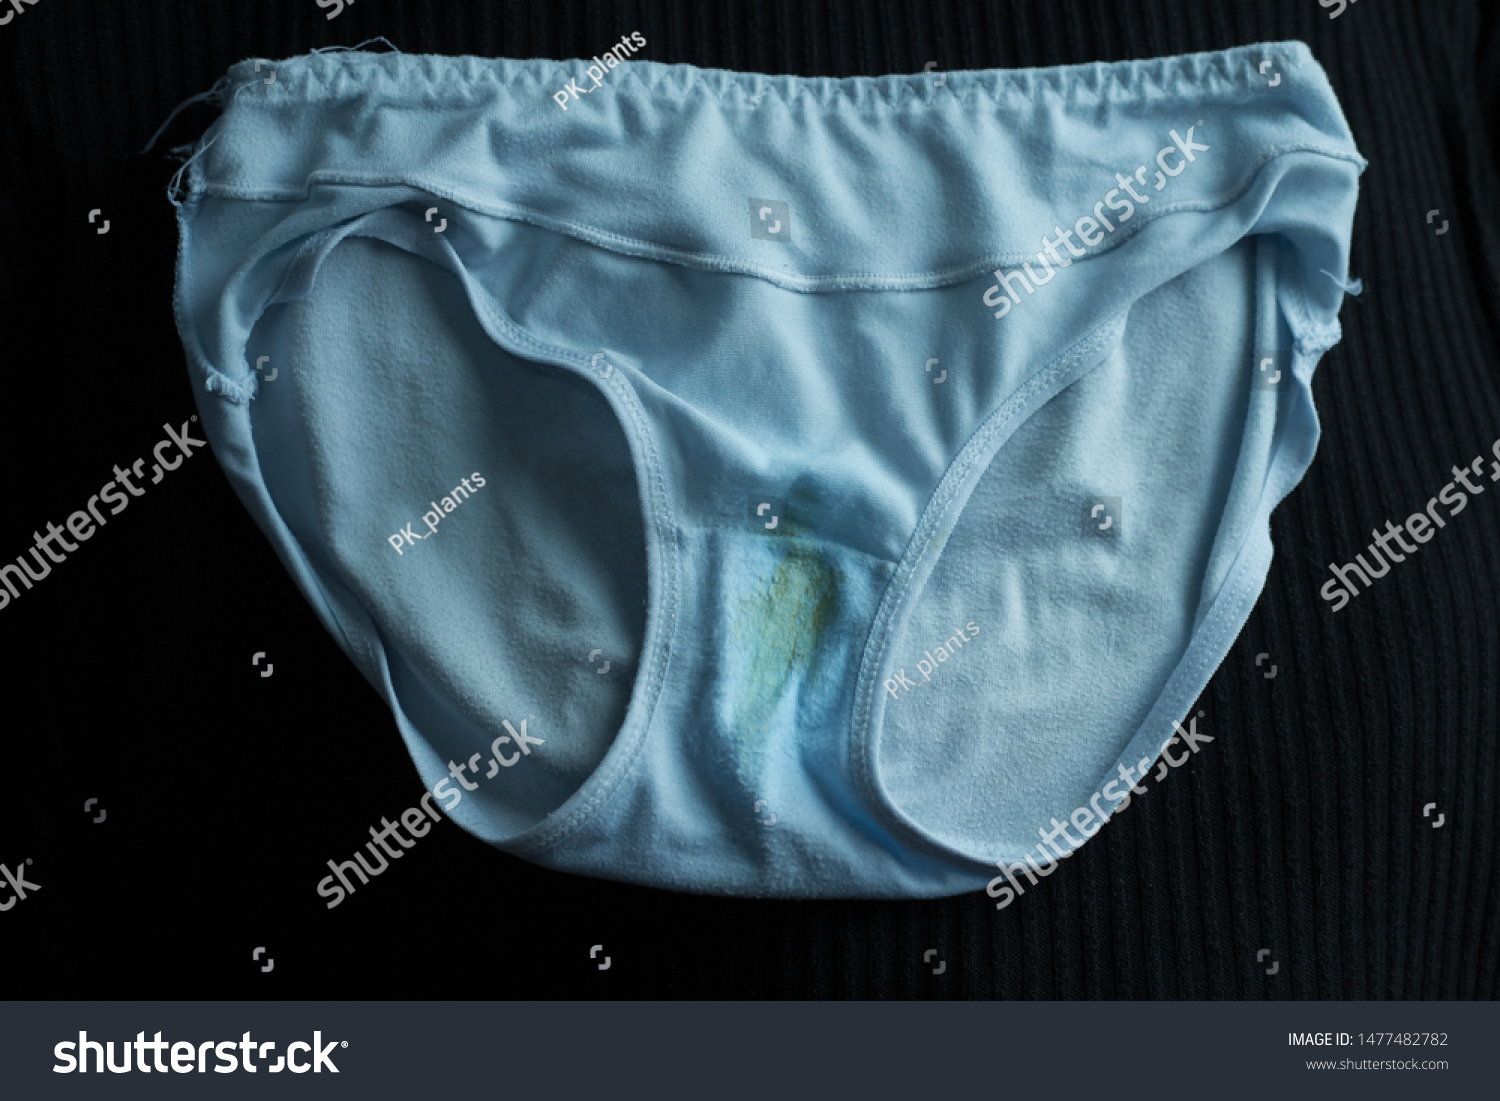 On panties stains Discharge and